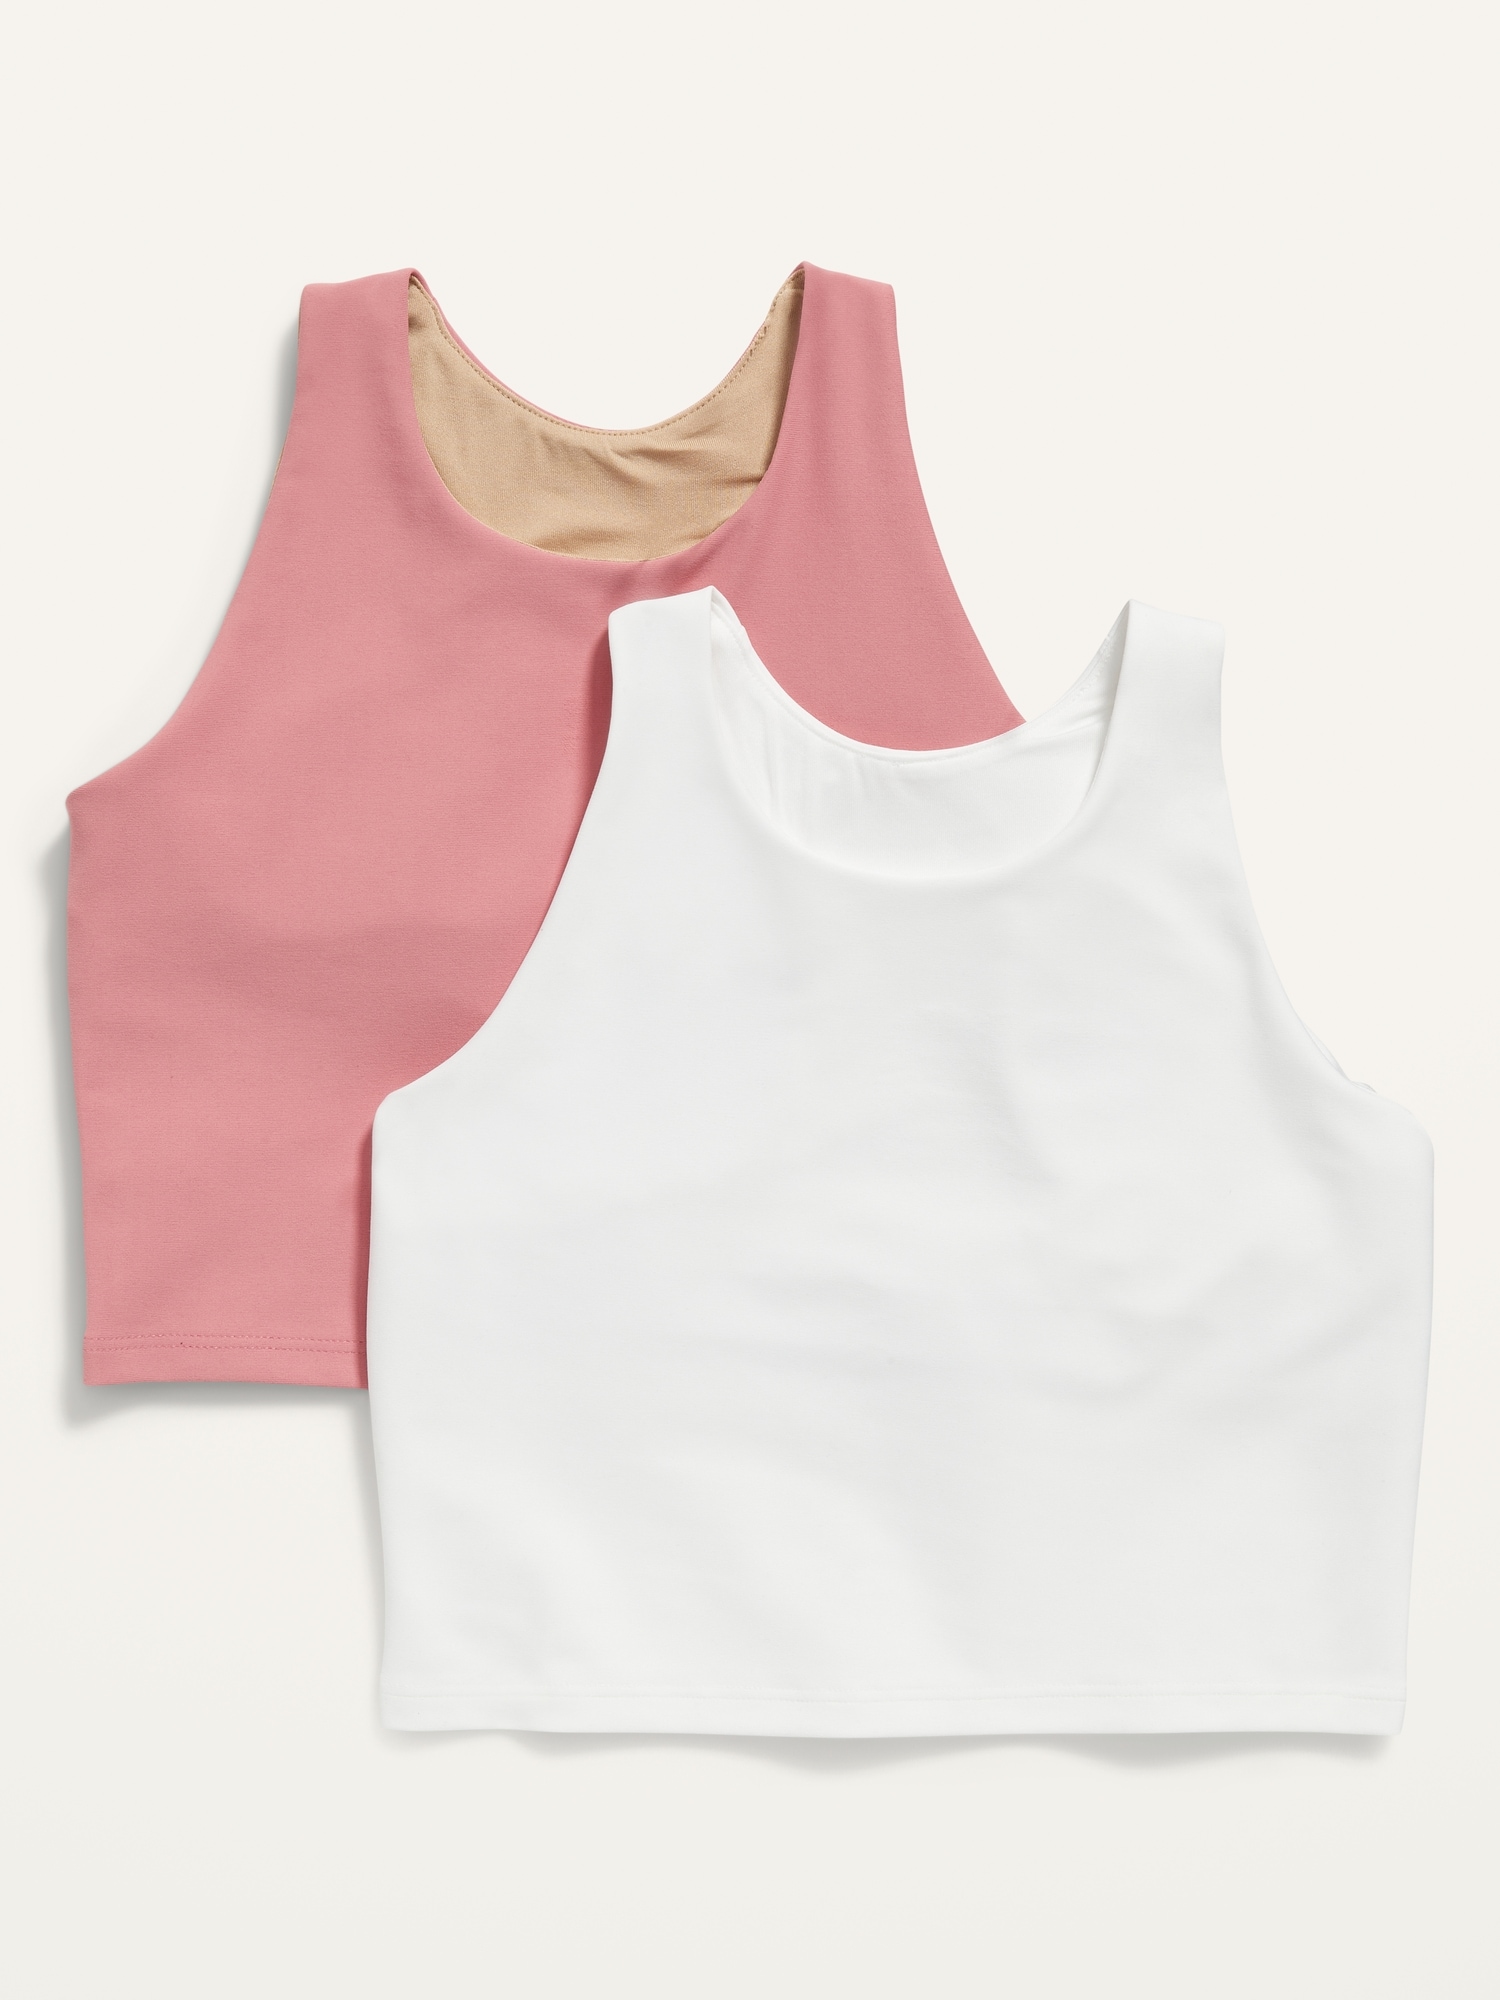 PowerSoft Longline Sports Bra and Leggings 2-Pack for Women, Old Navy